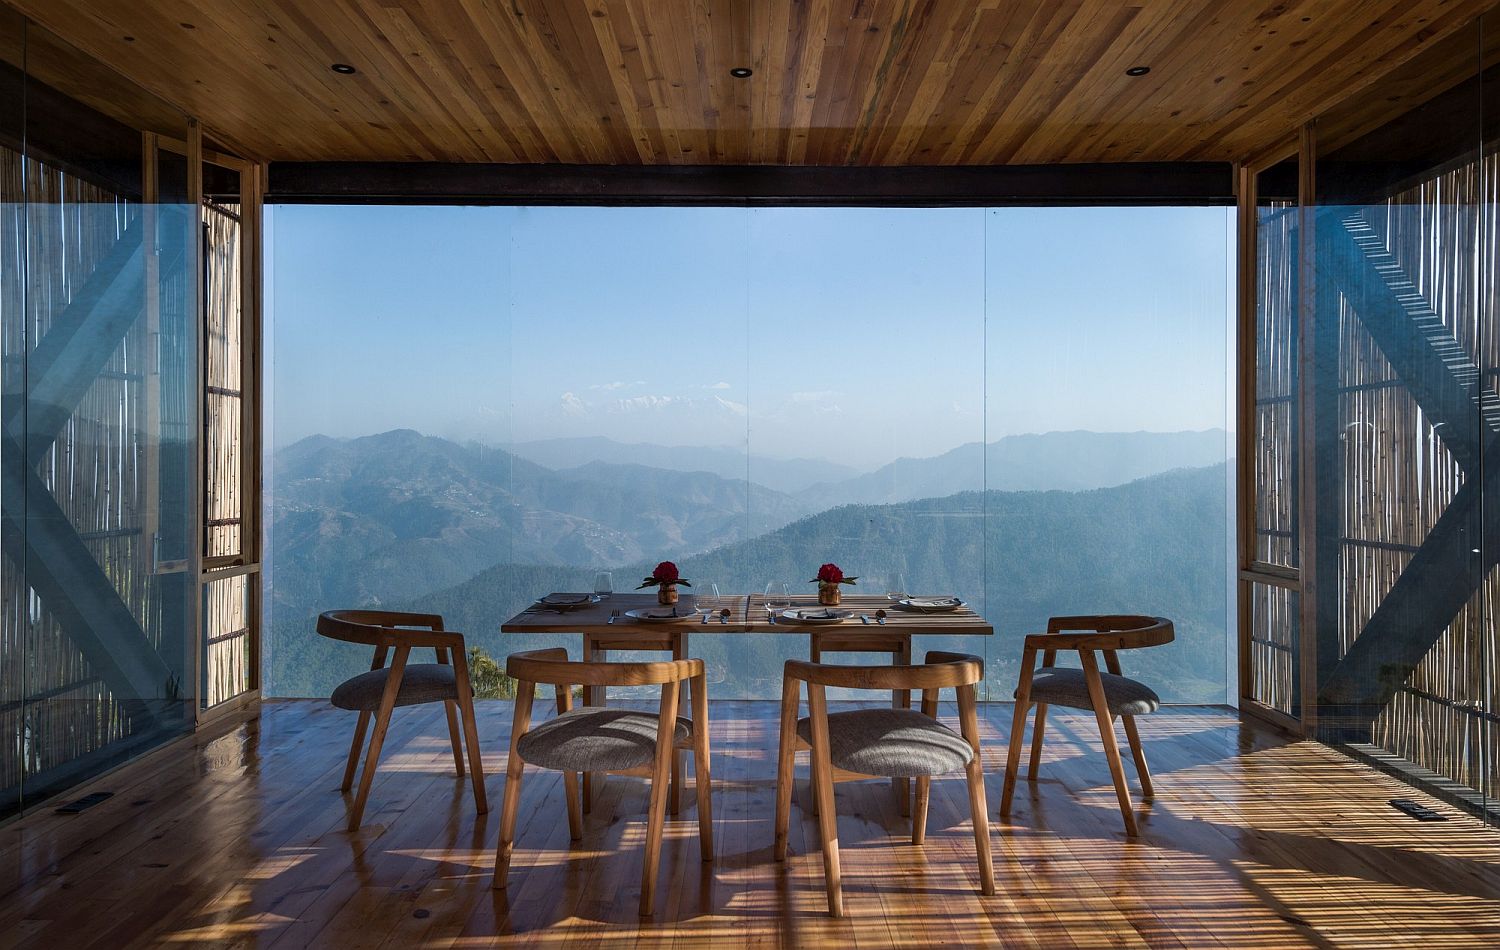 Stunning-view-of-Kanchenjunga-from-the-dining-room-of-the-Uttarakhand-hotel